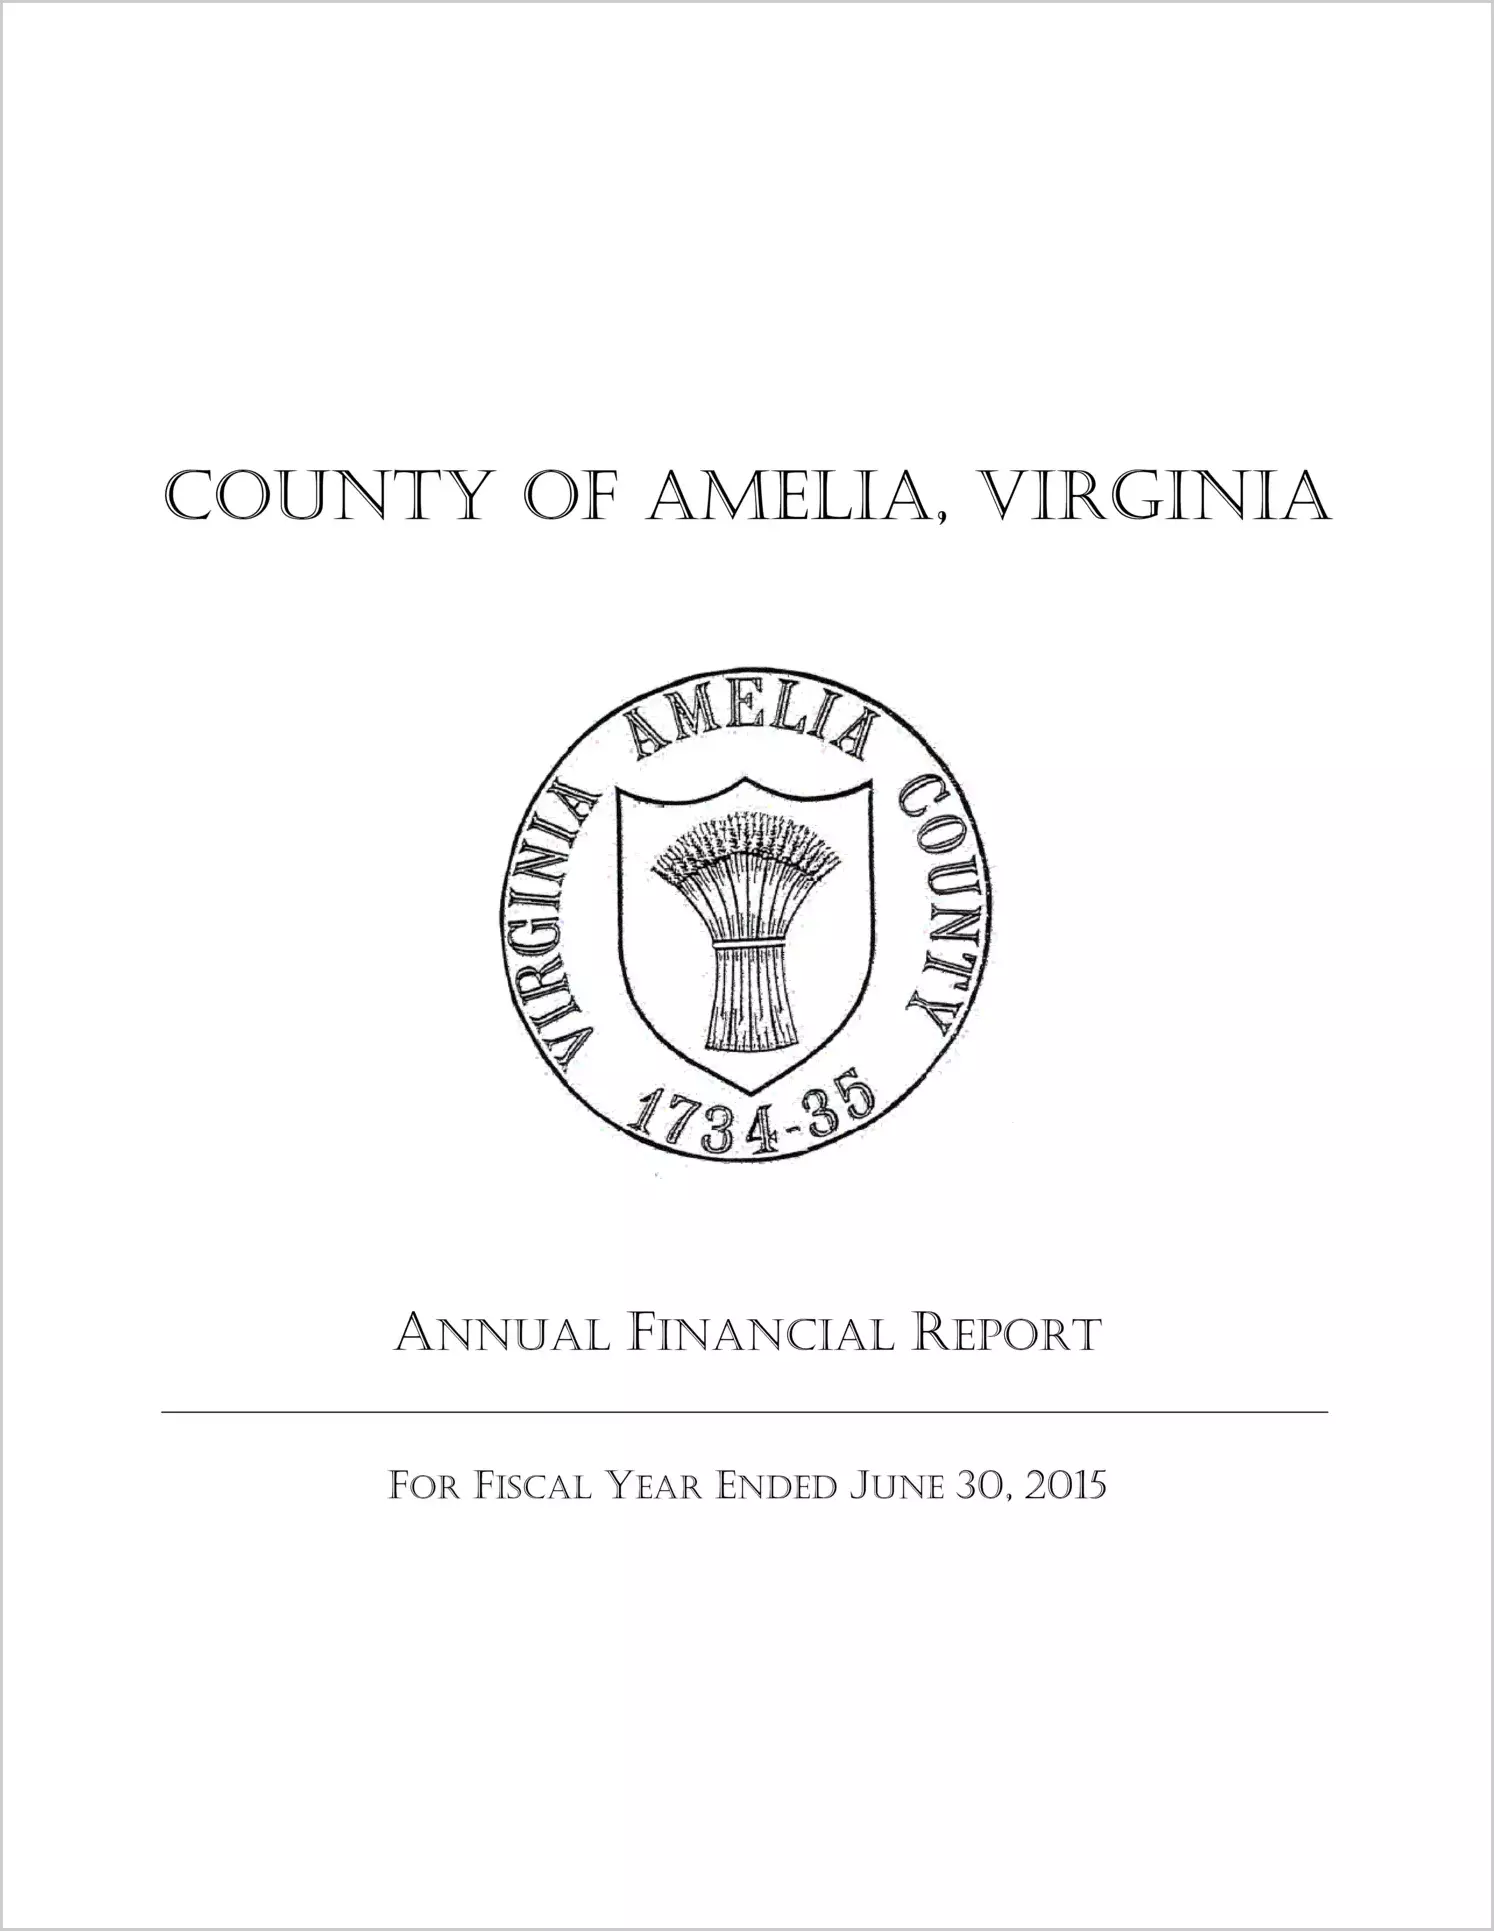 2015 Annual Financial Report for County of Amelia